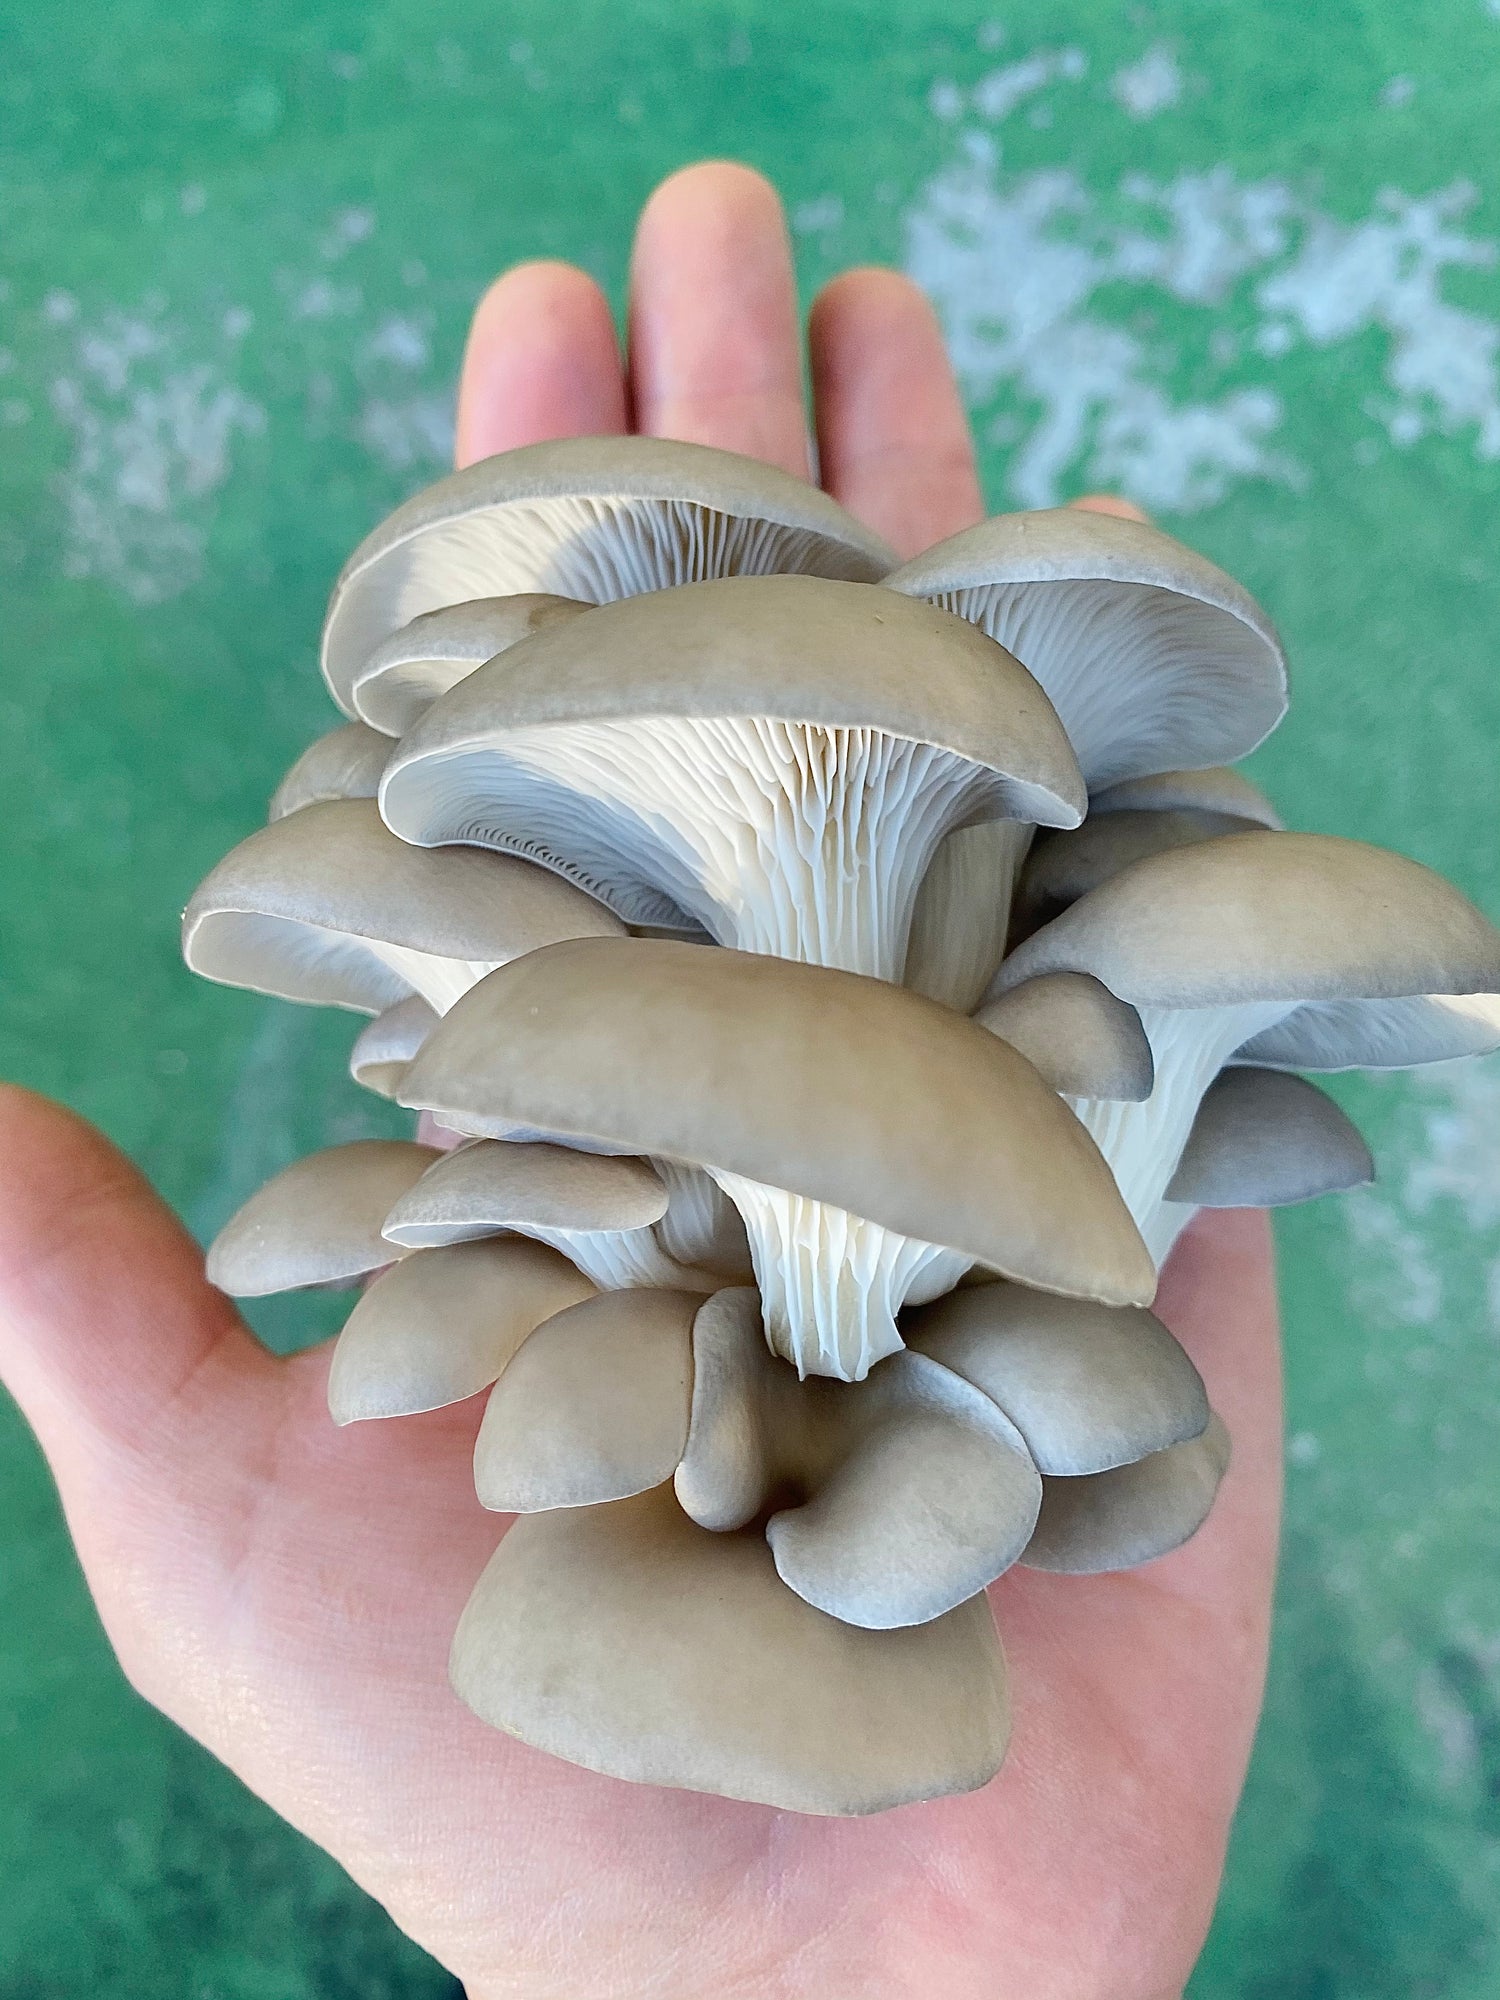 Hand holding an oyster mushroom cluster